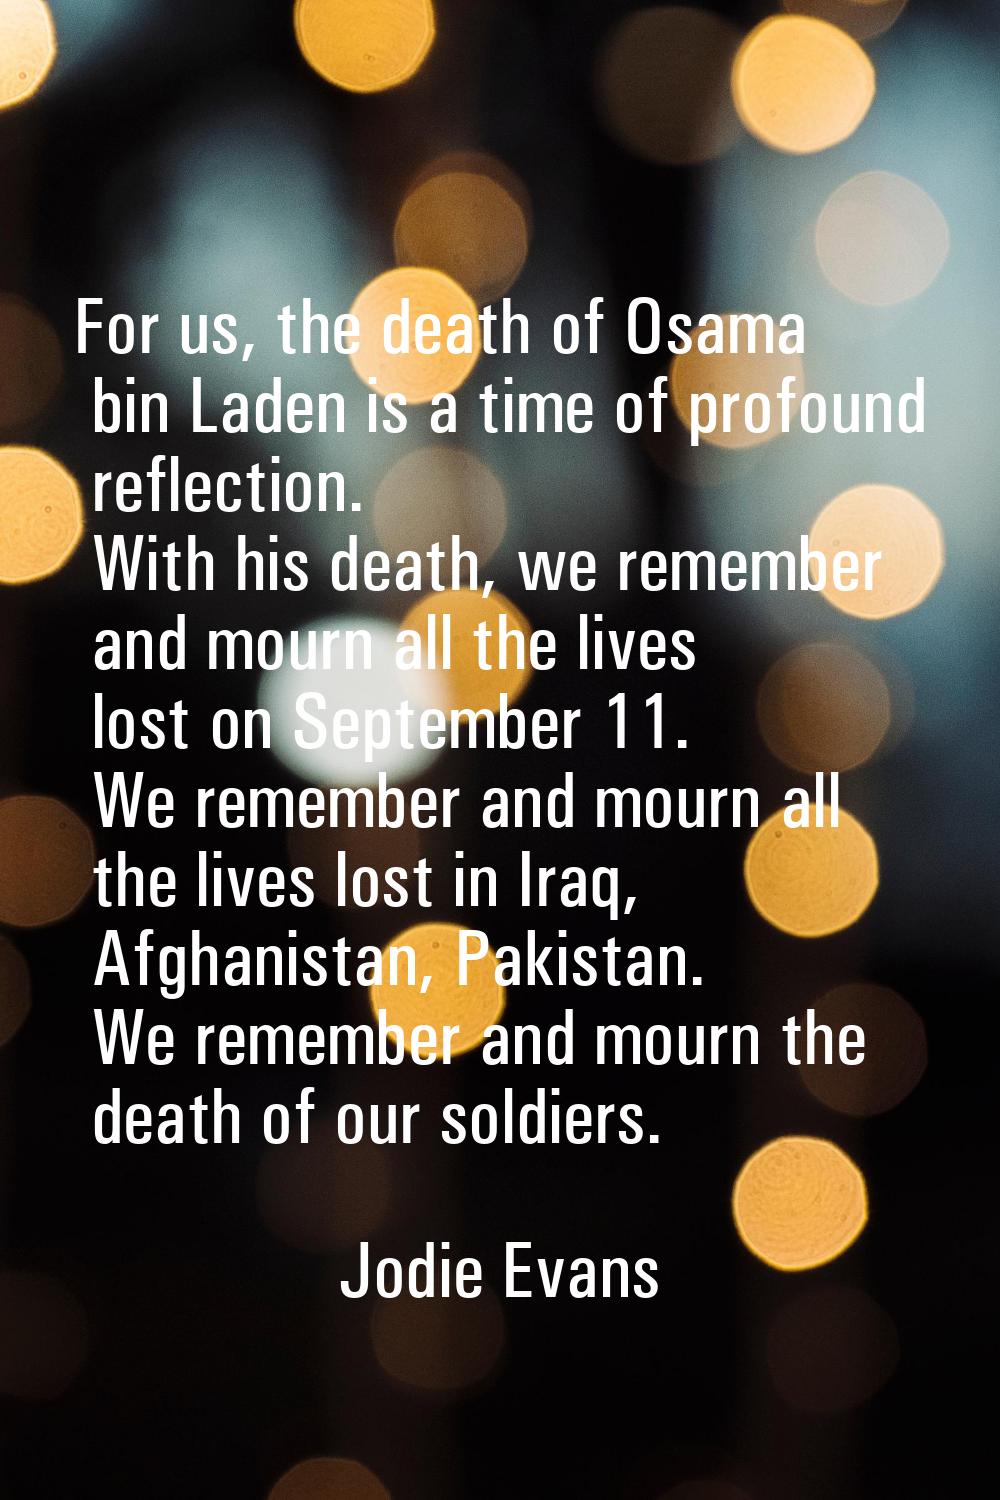 For us, the death of Osama bin Laden is a time of profound reflection. With his death, we remember 